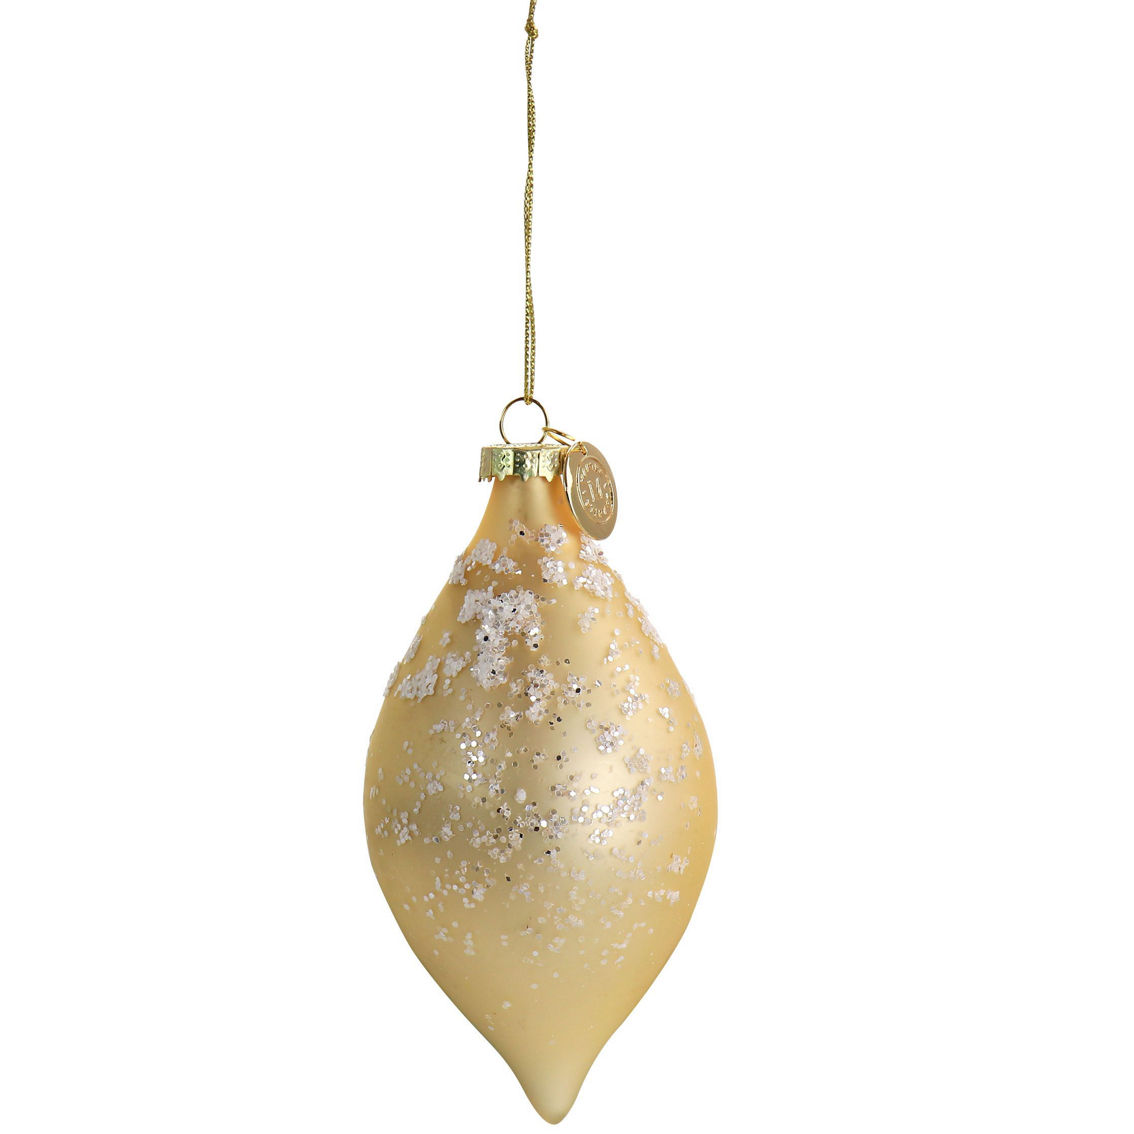 Martha Stewart Holiday Pointy Ball and Pinecone 4 Piece Ornament Set in Gold - Image 3 of 5